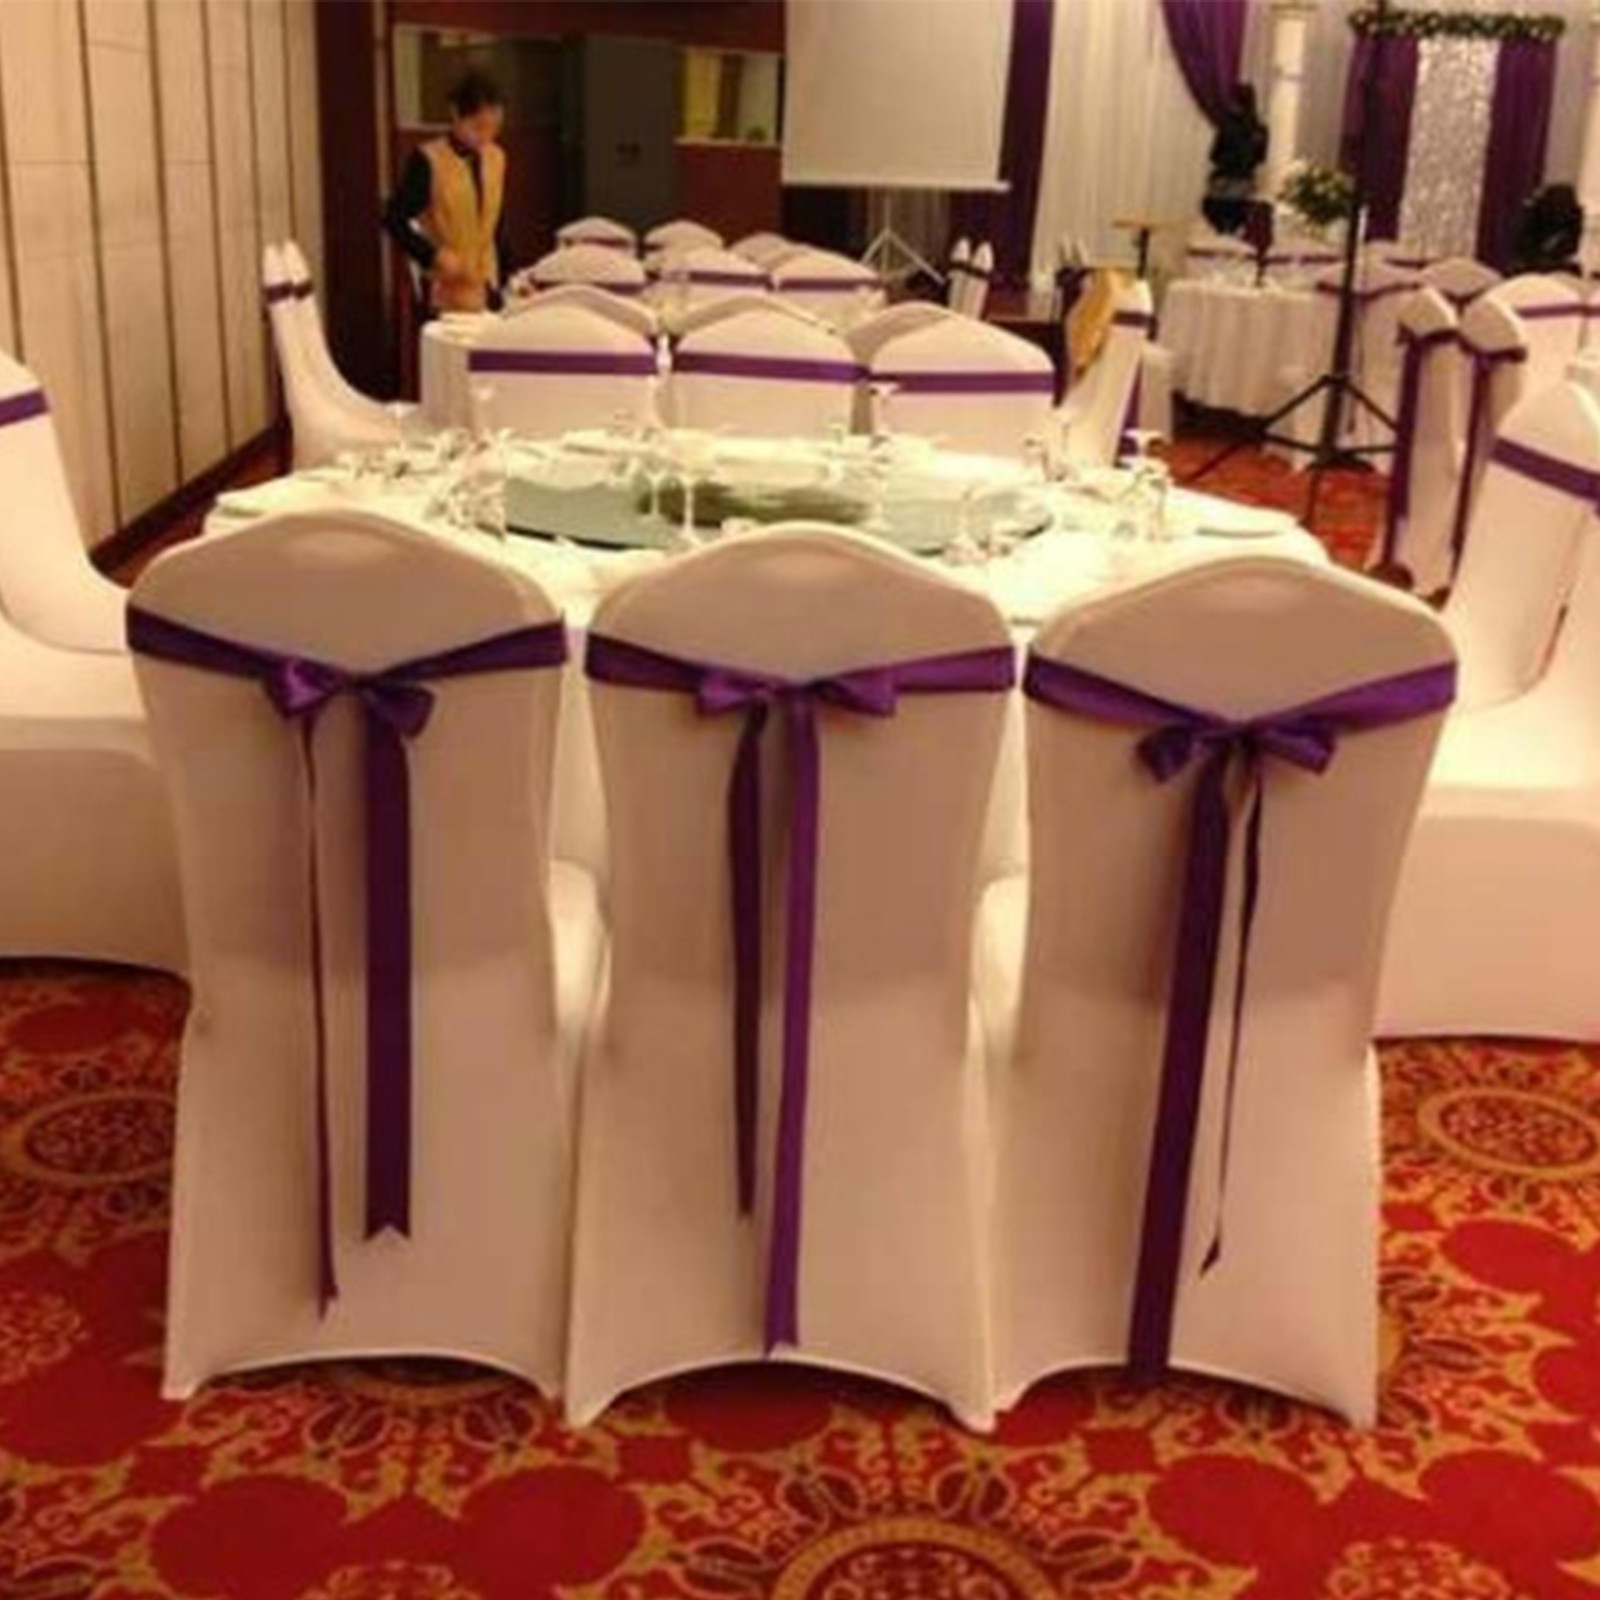 Universal Polyester Strech Spandex Chair Flat Covers Wedding Party Banquet Decor 